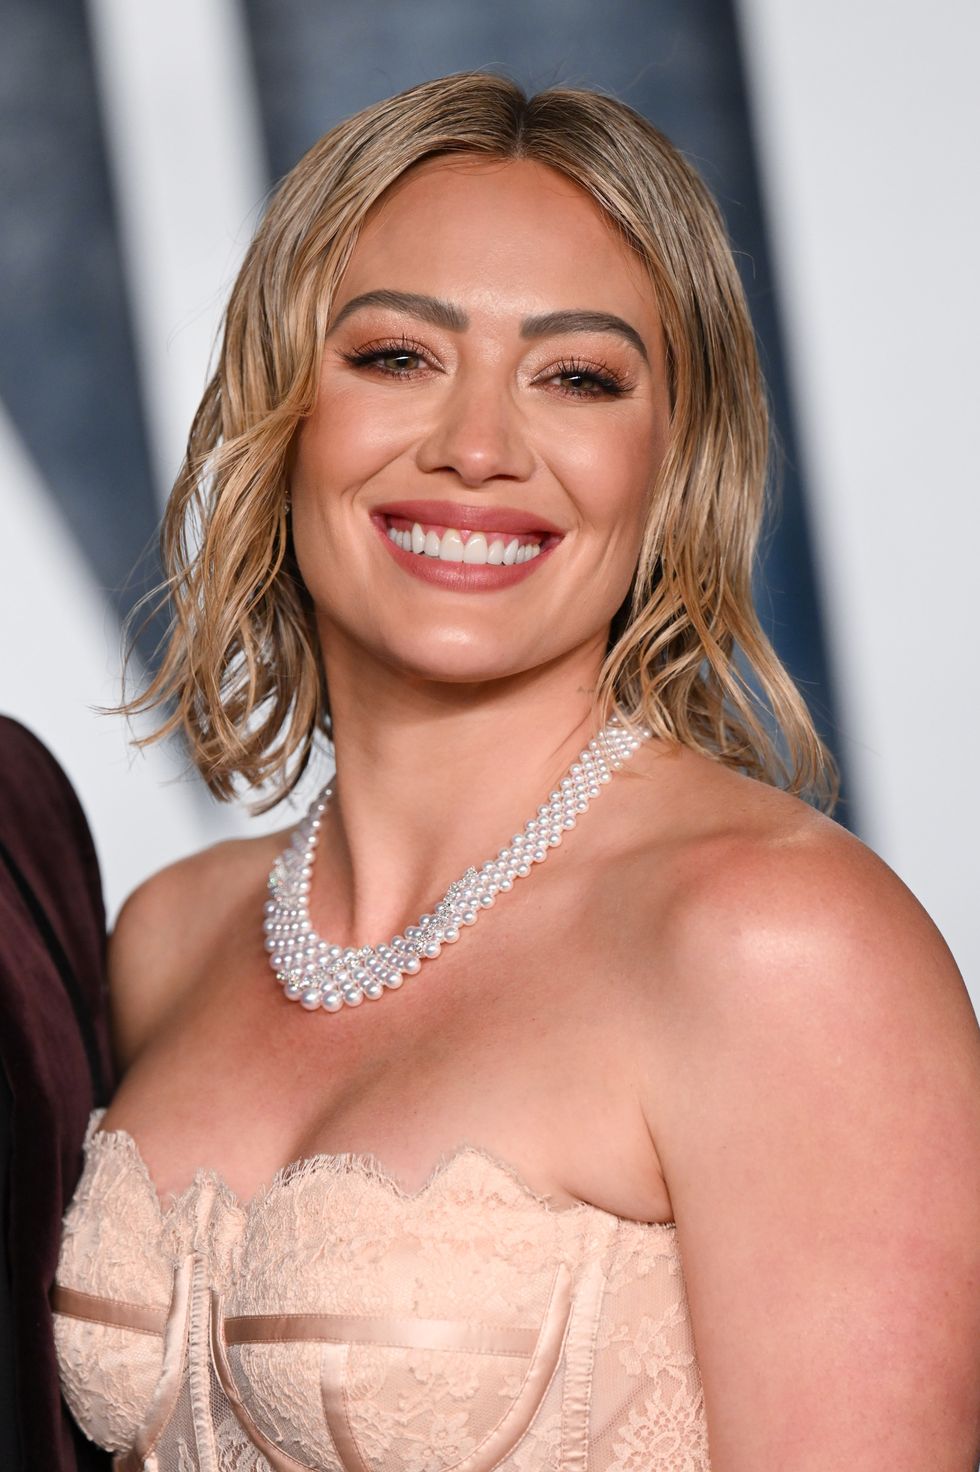 How I Met Your Father Star Hilary Duff Wore A Lingerie Inspired Look And Shocked Fans